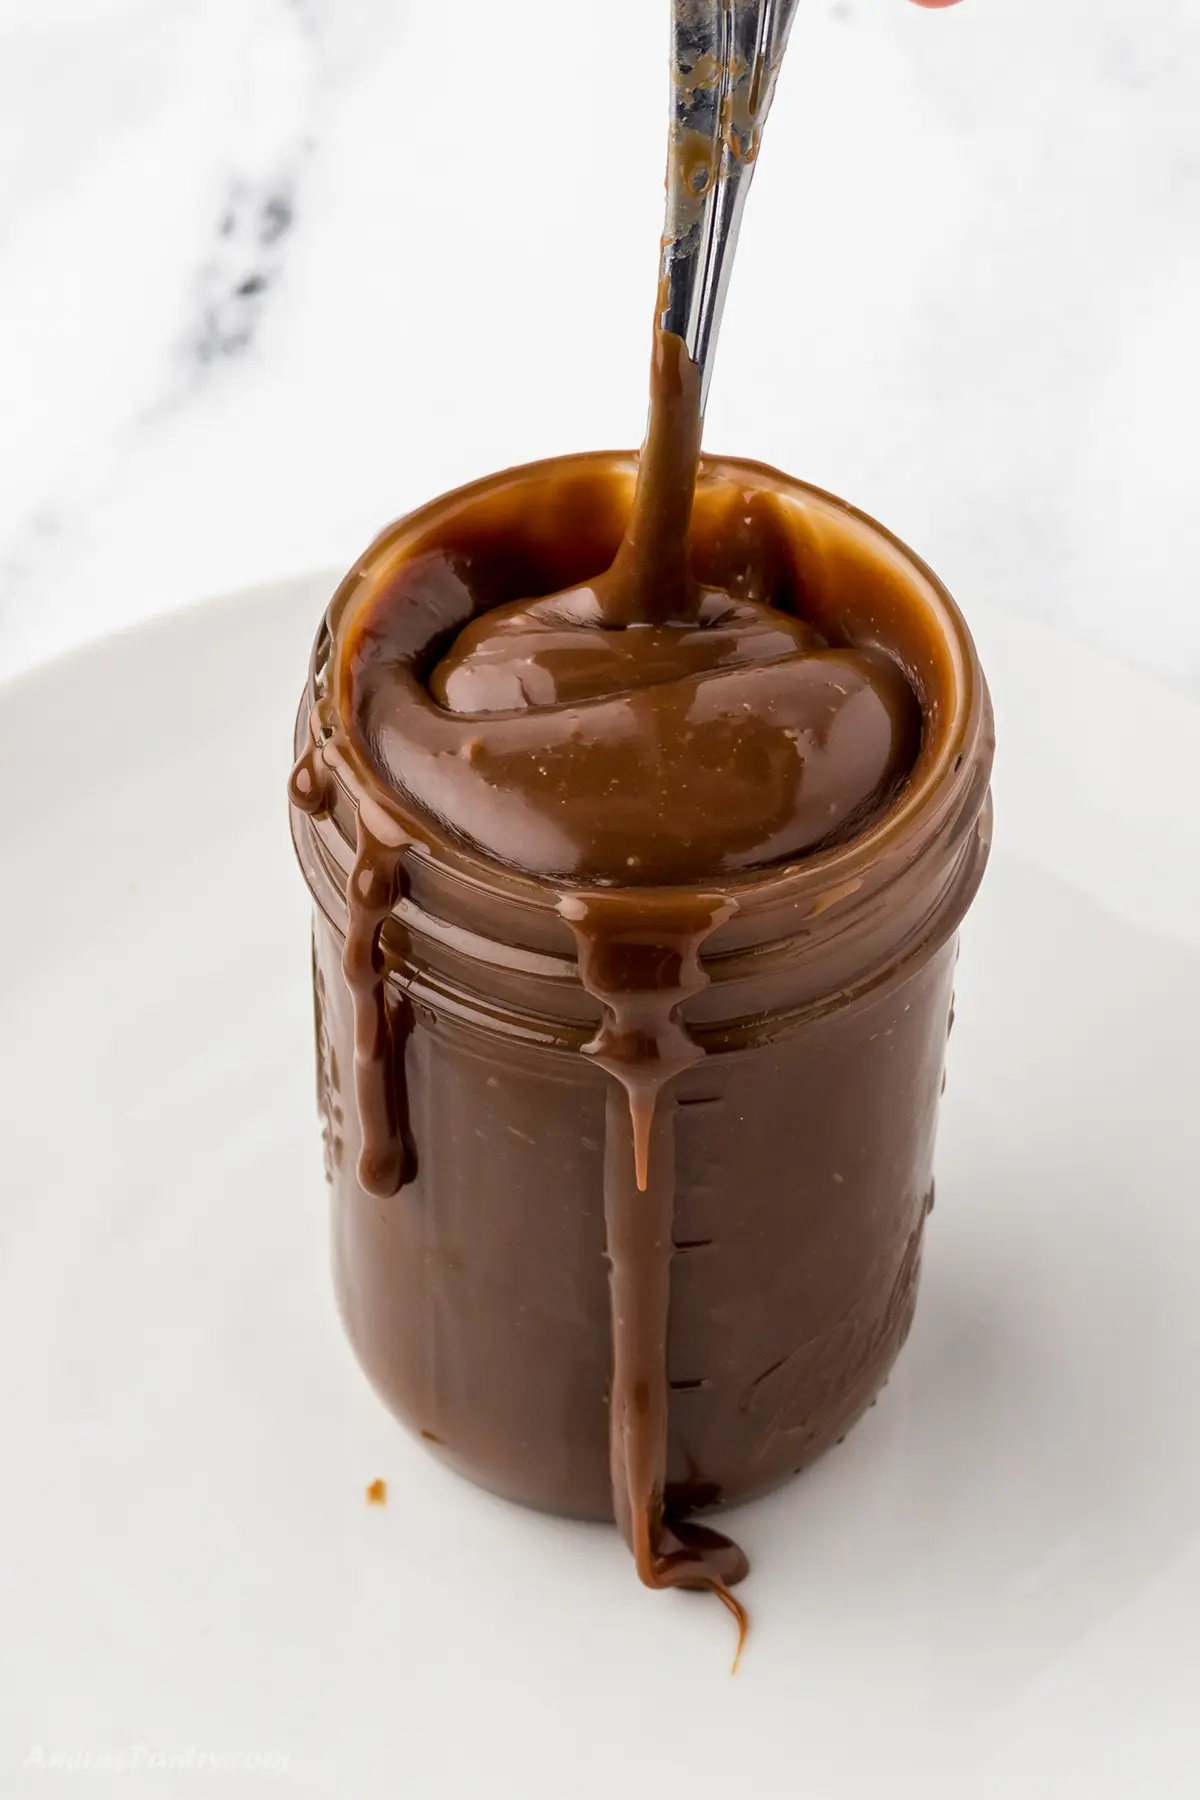 A jar of hot fudge sauce with a spoon.